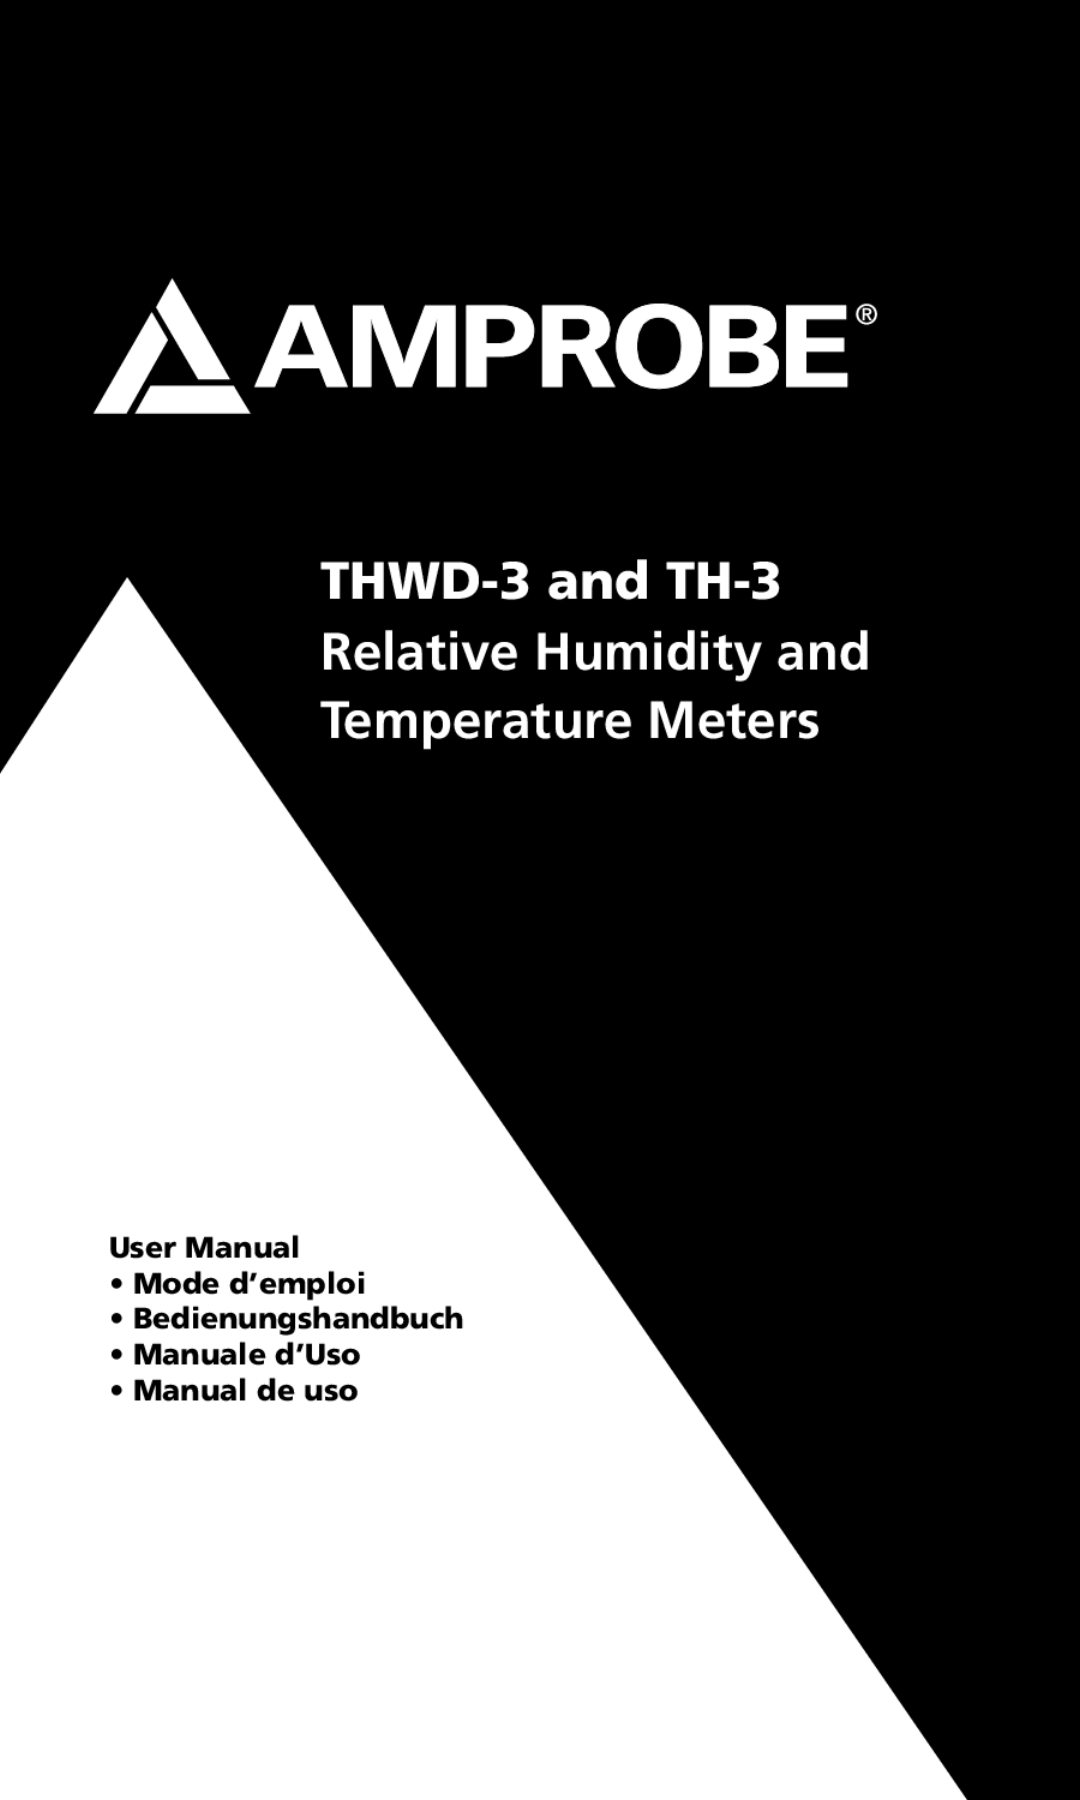 Ampro Corporation user manual THWD-3 and TH-3 Relative Humidity and Temperature Meters, Manual de uso 